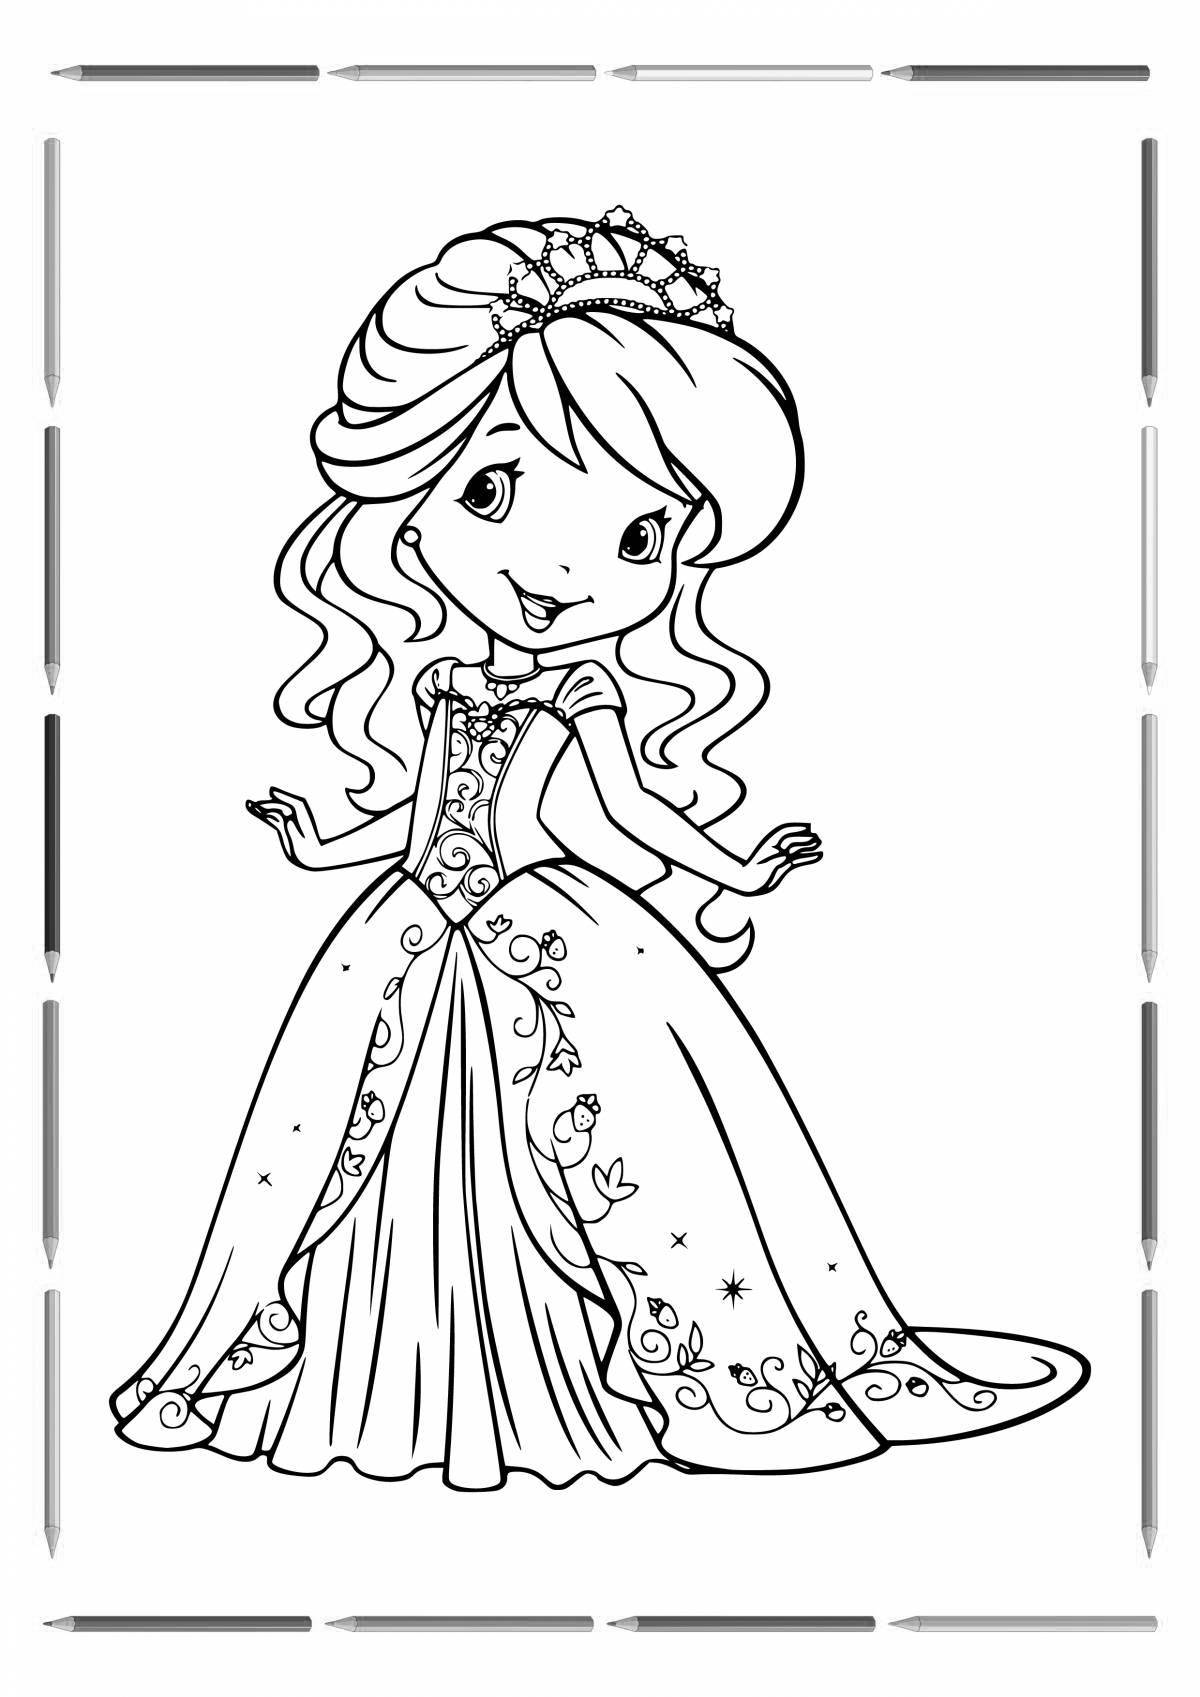 Playful coloring of princesses 4-5 years old